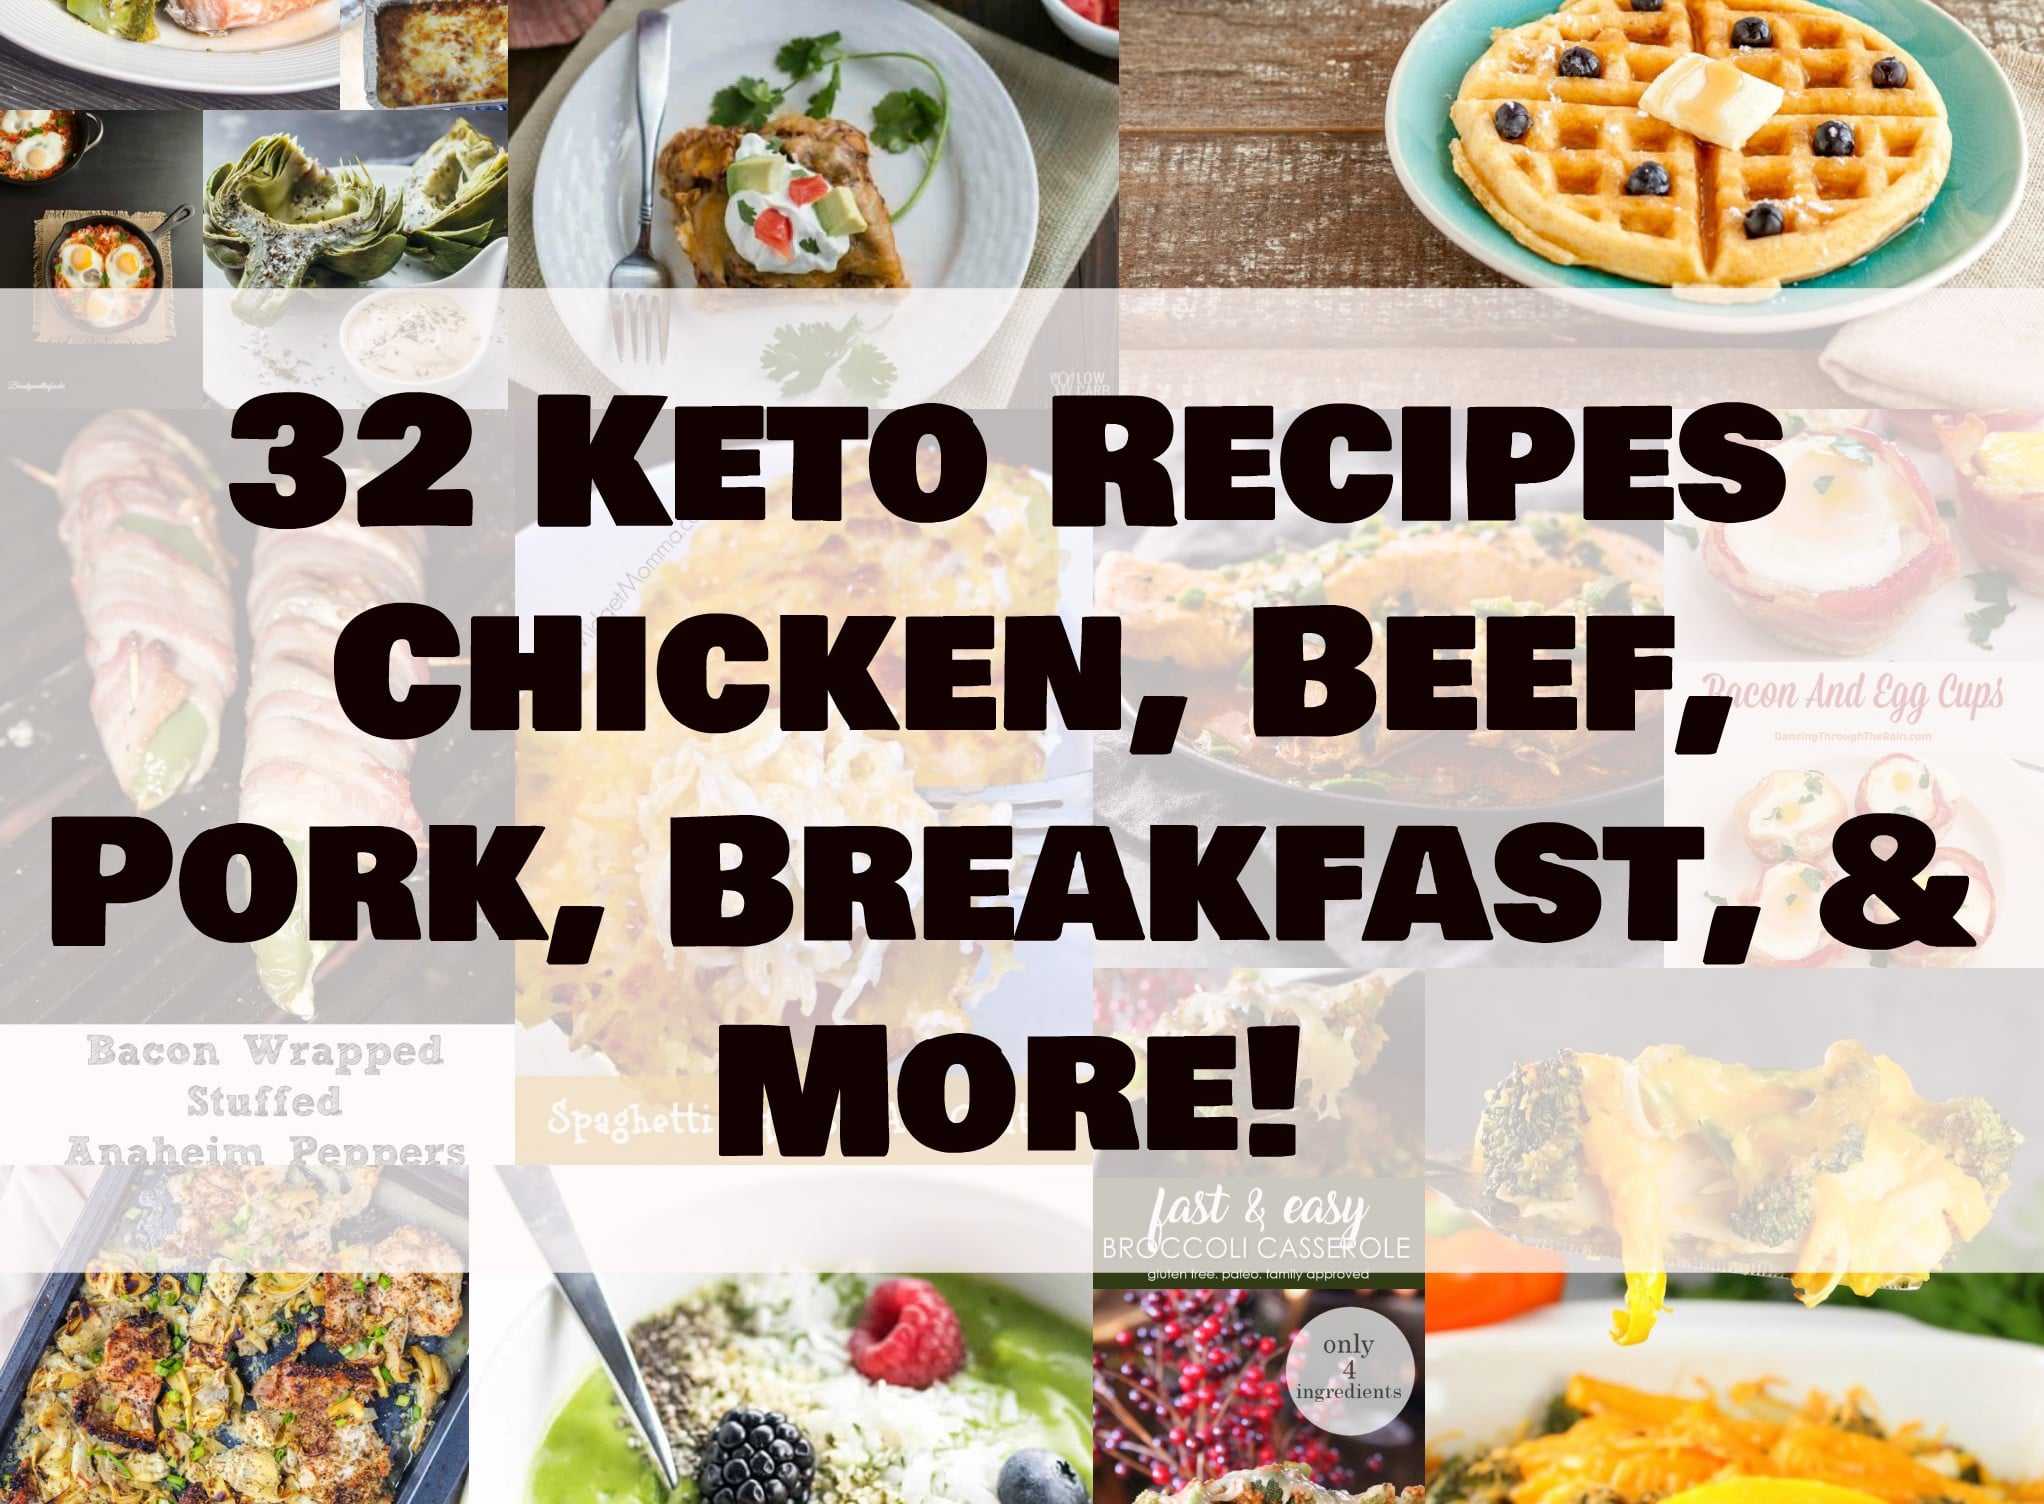 Are you following the Keto eating plan? Here's a list of 32+ Keto recipes to help make meal planning easier!